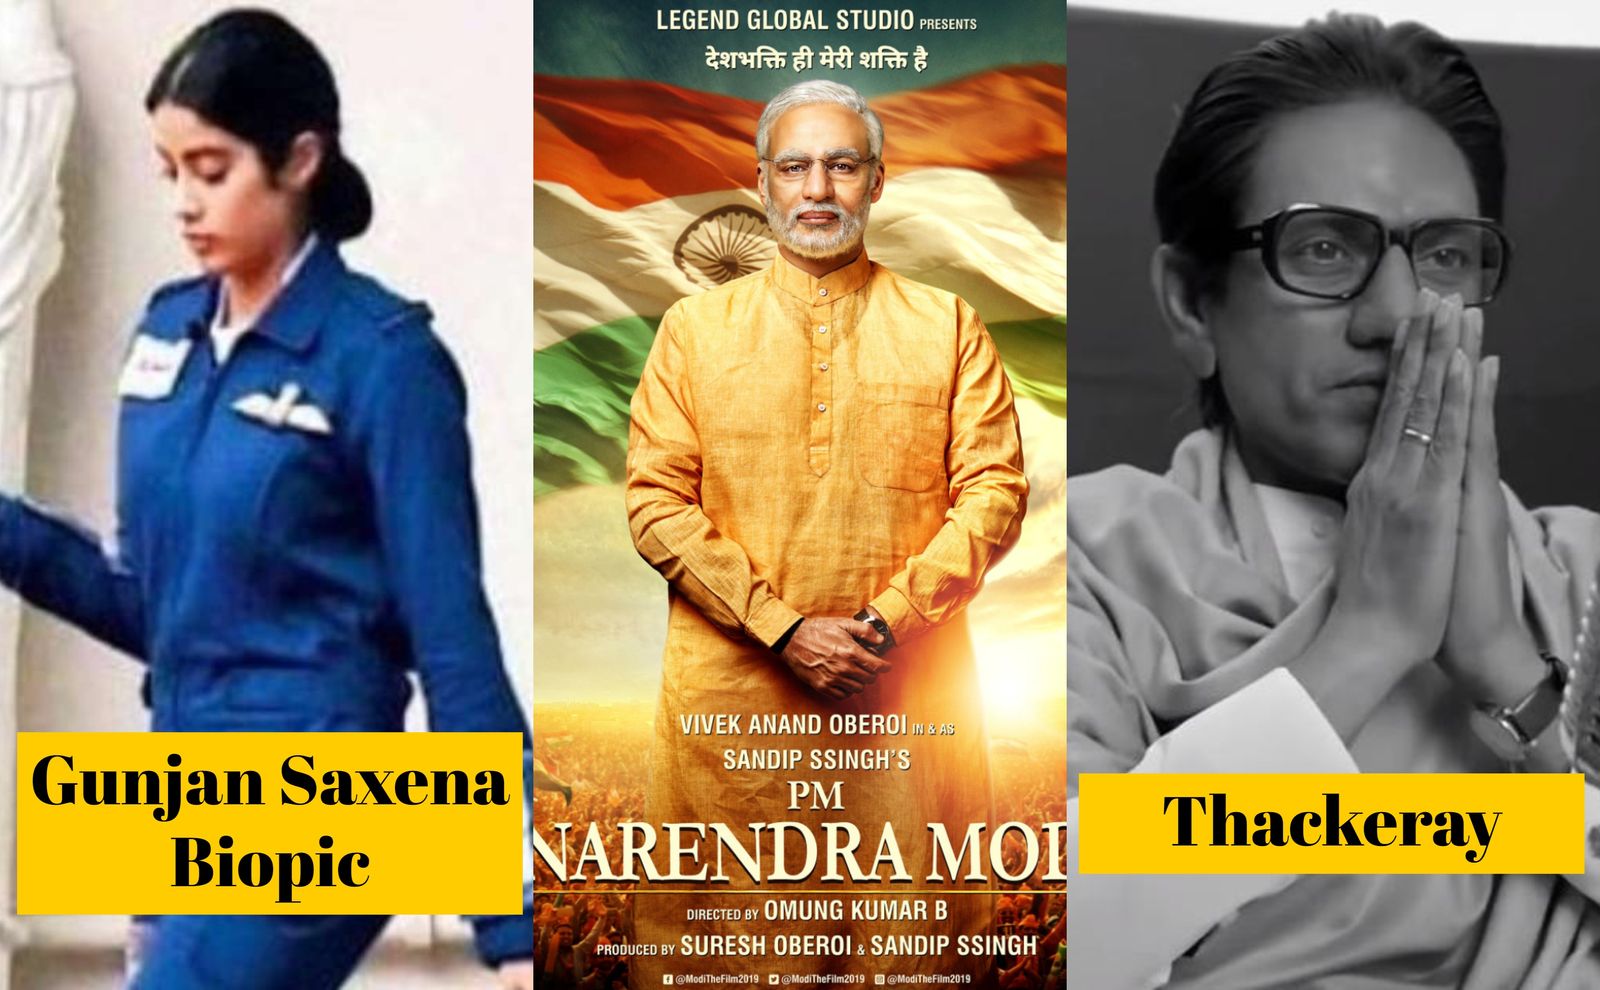 19 Upcoming Bollywood Biopics That Will Make You Super Excited!